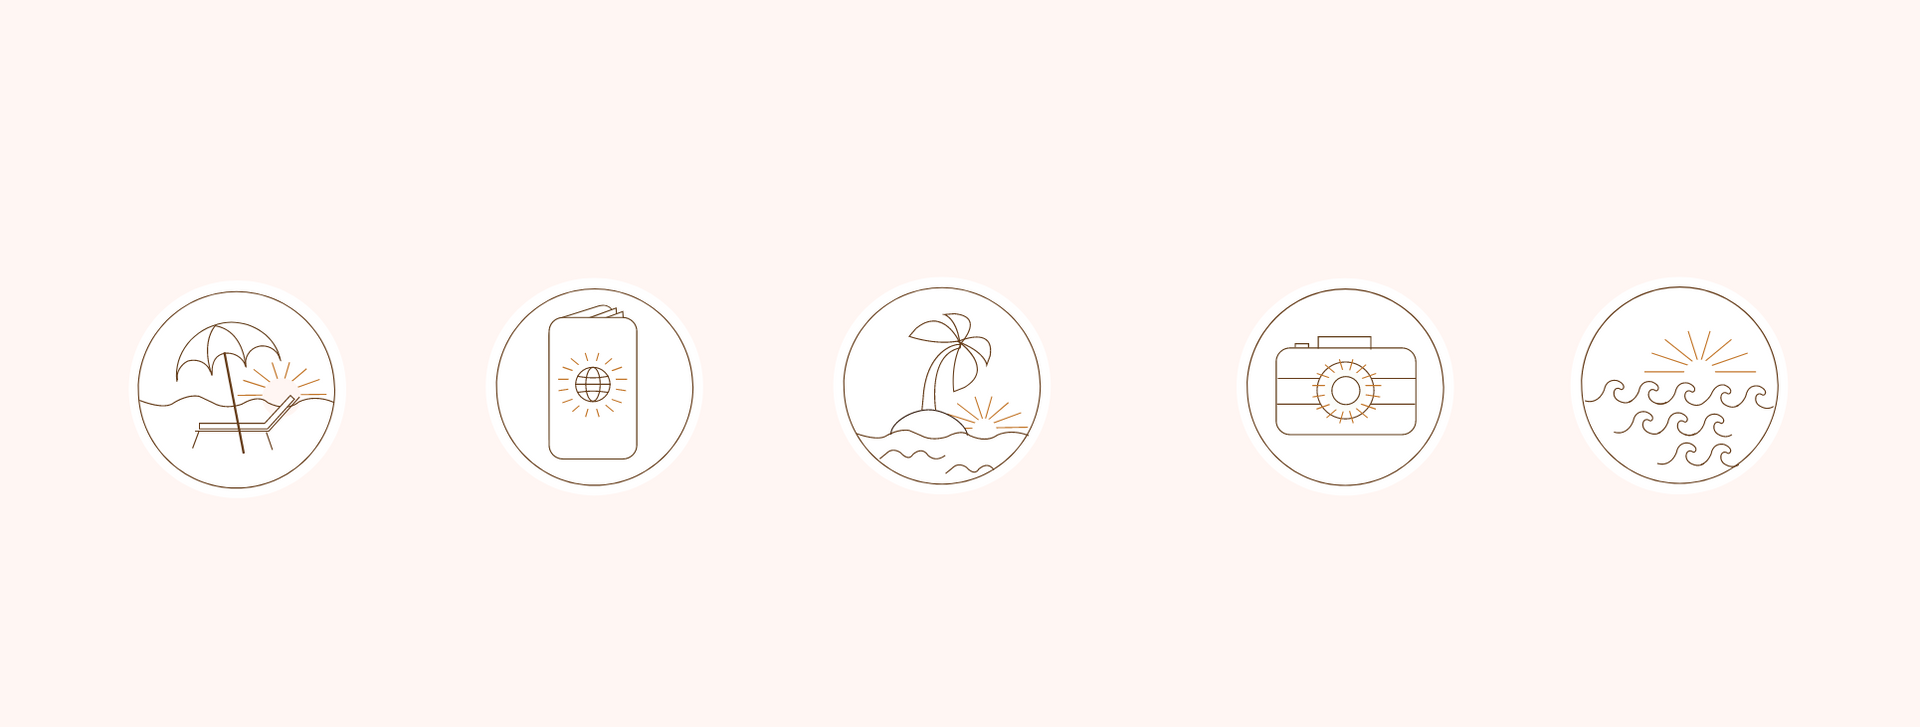 A set of icons on a pink background.